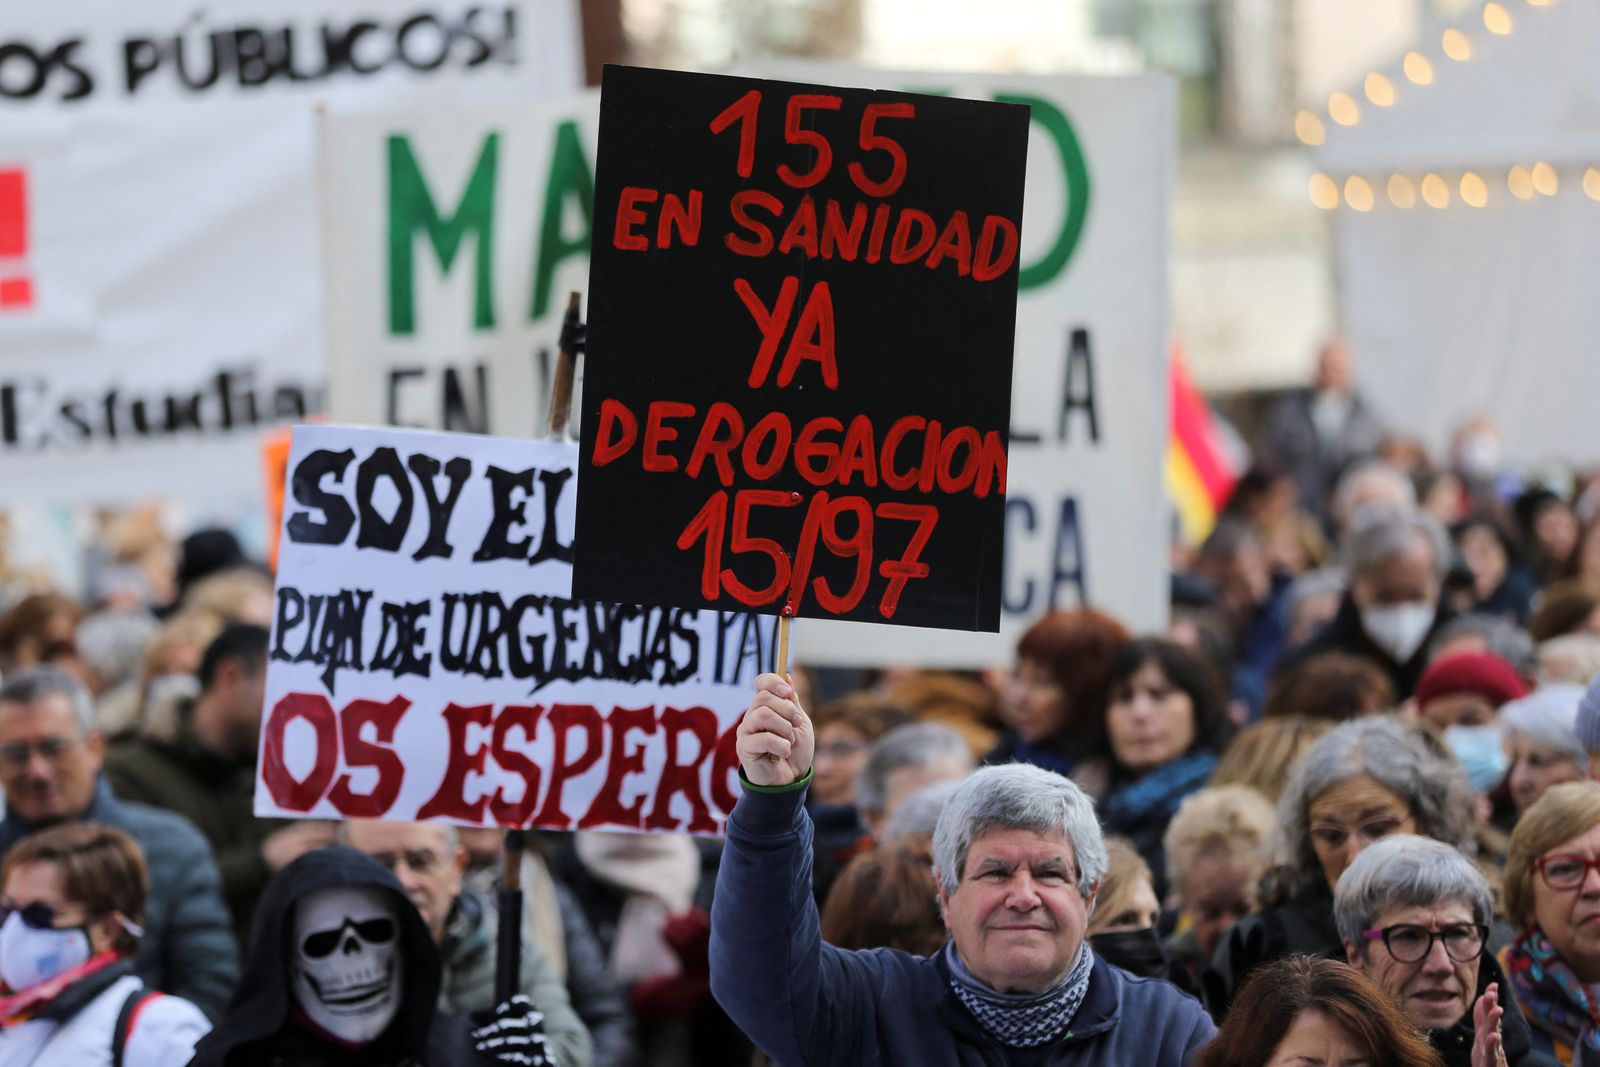 Protest against the regional government's public health care policy, in Madrid - REUTERS